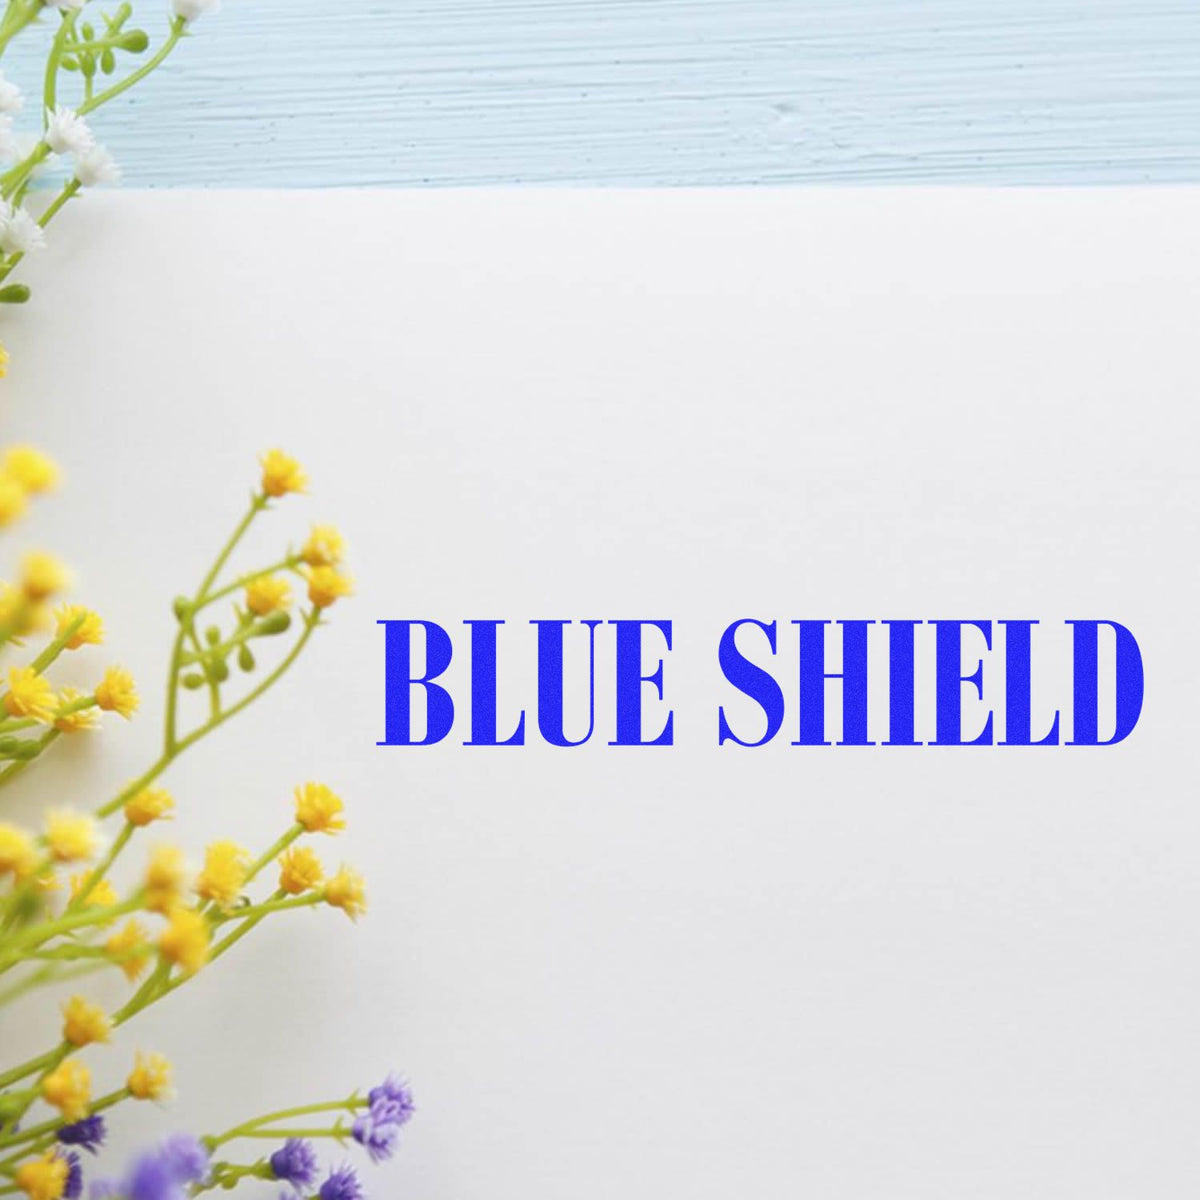 Large Blue Shield Rubber Stamp In Use Photo